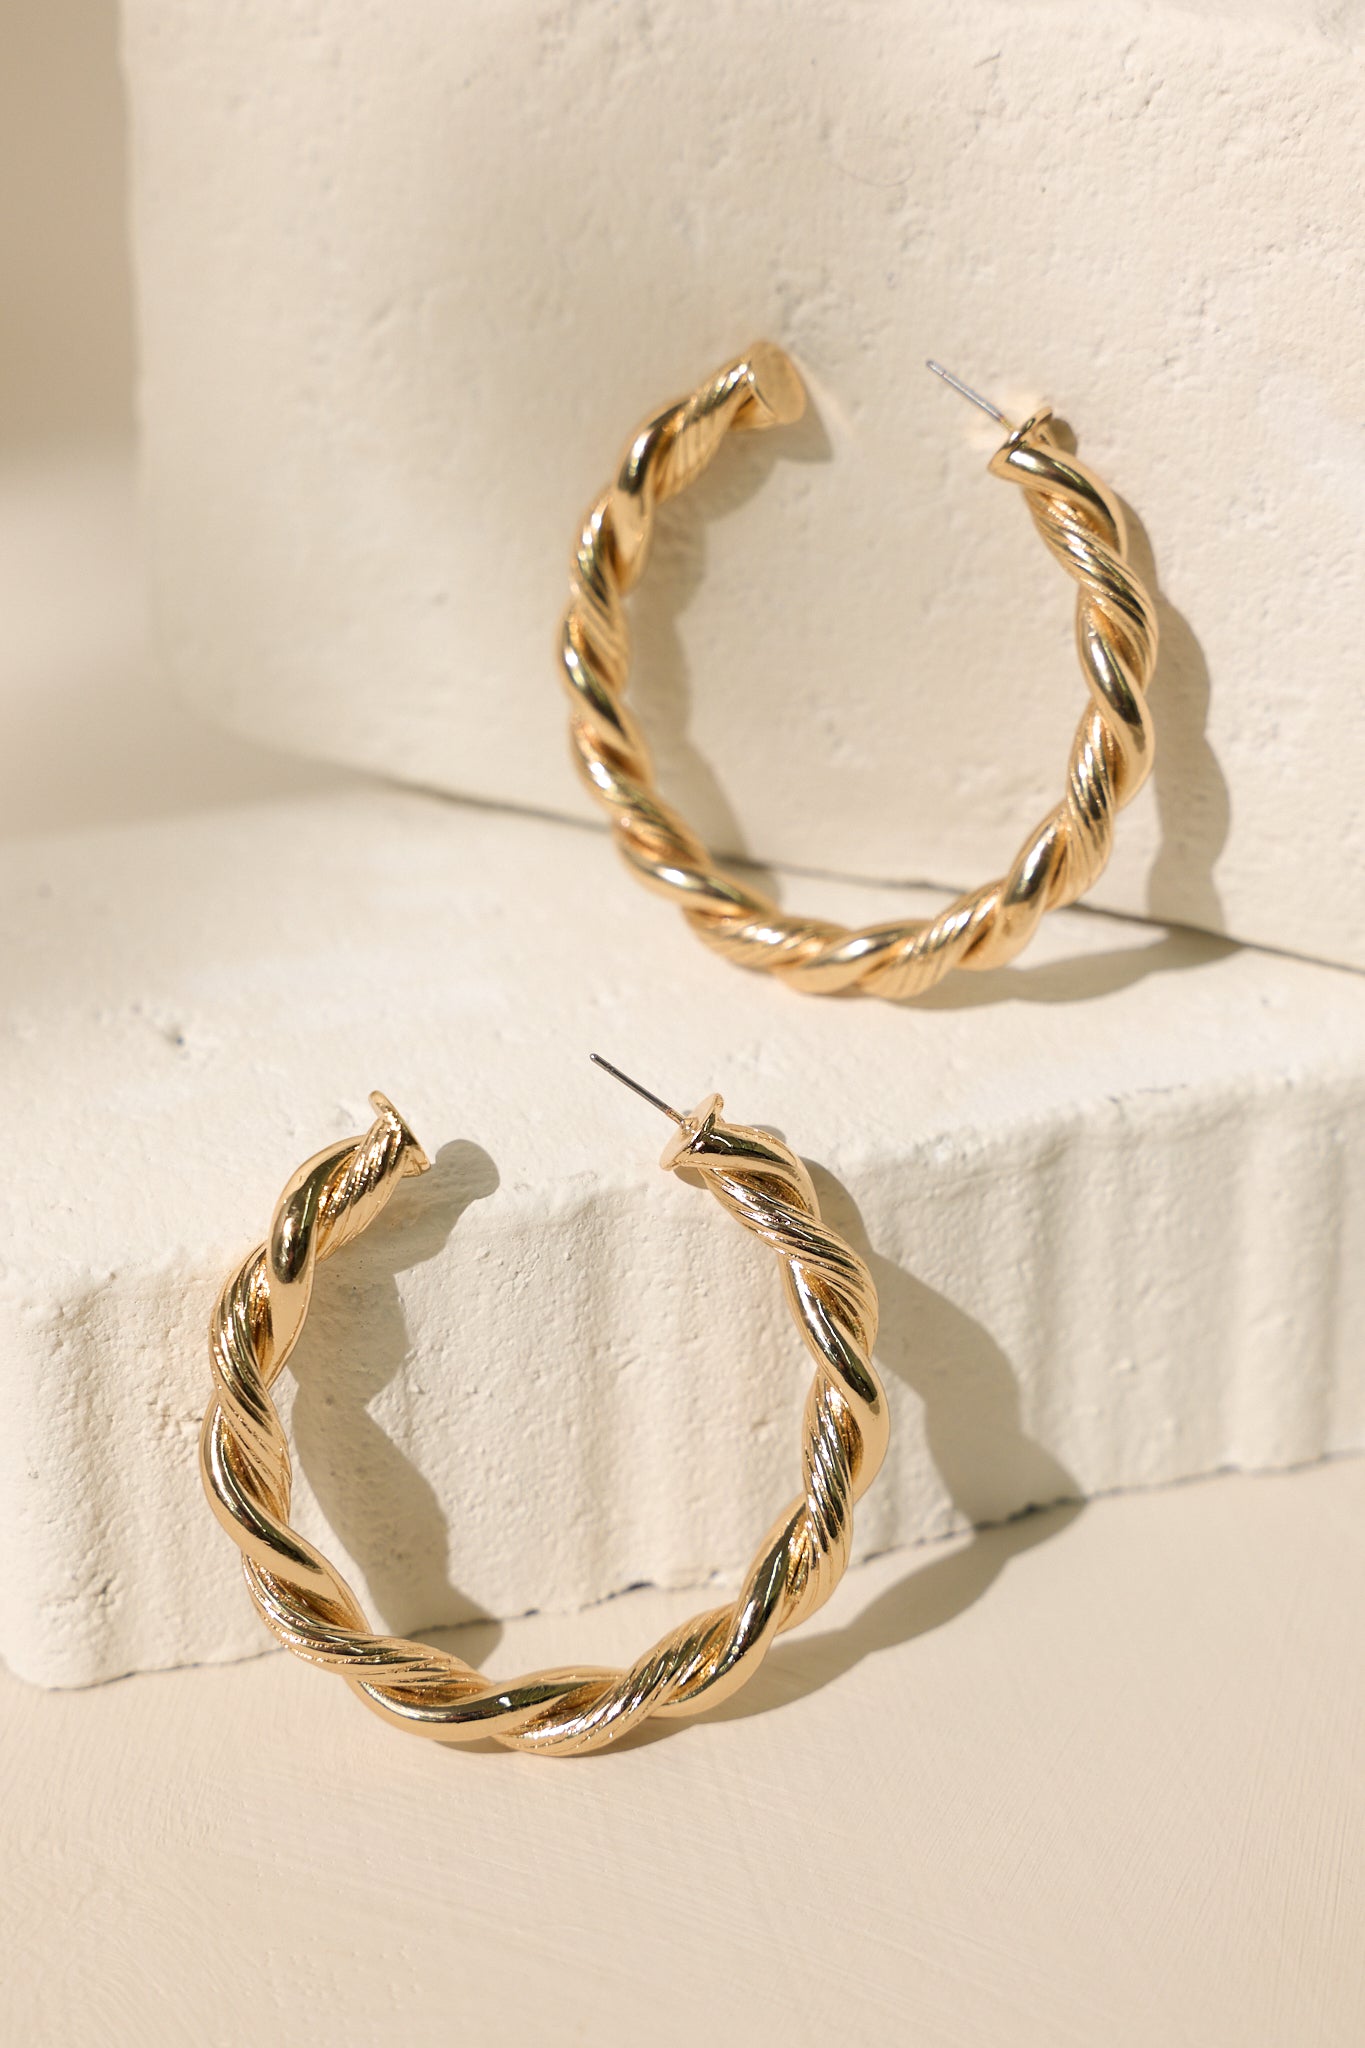 Stand alone view of these gold earrings that feature an incomplete hoop design, a textured twisted design, and secure post backings.